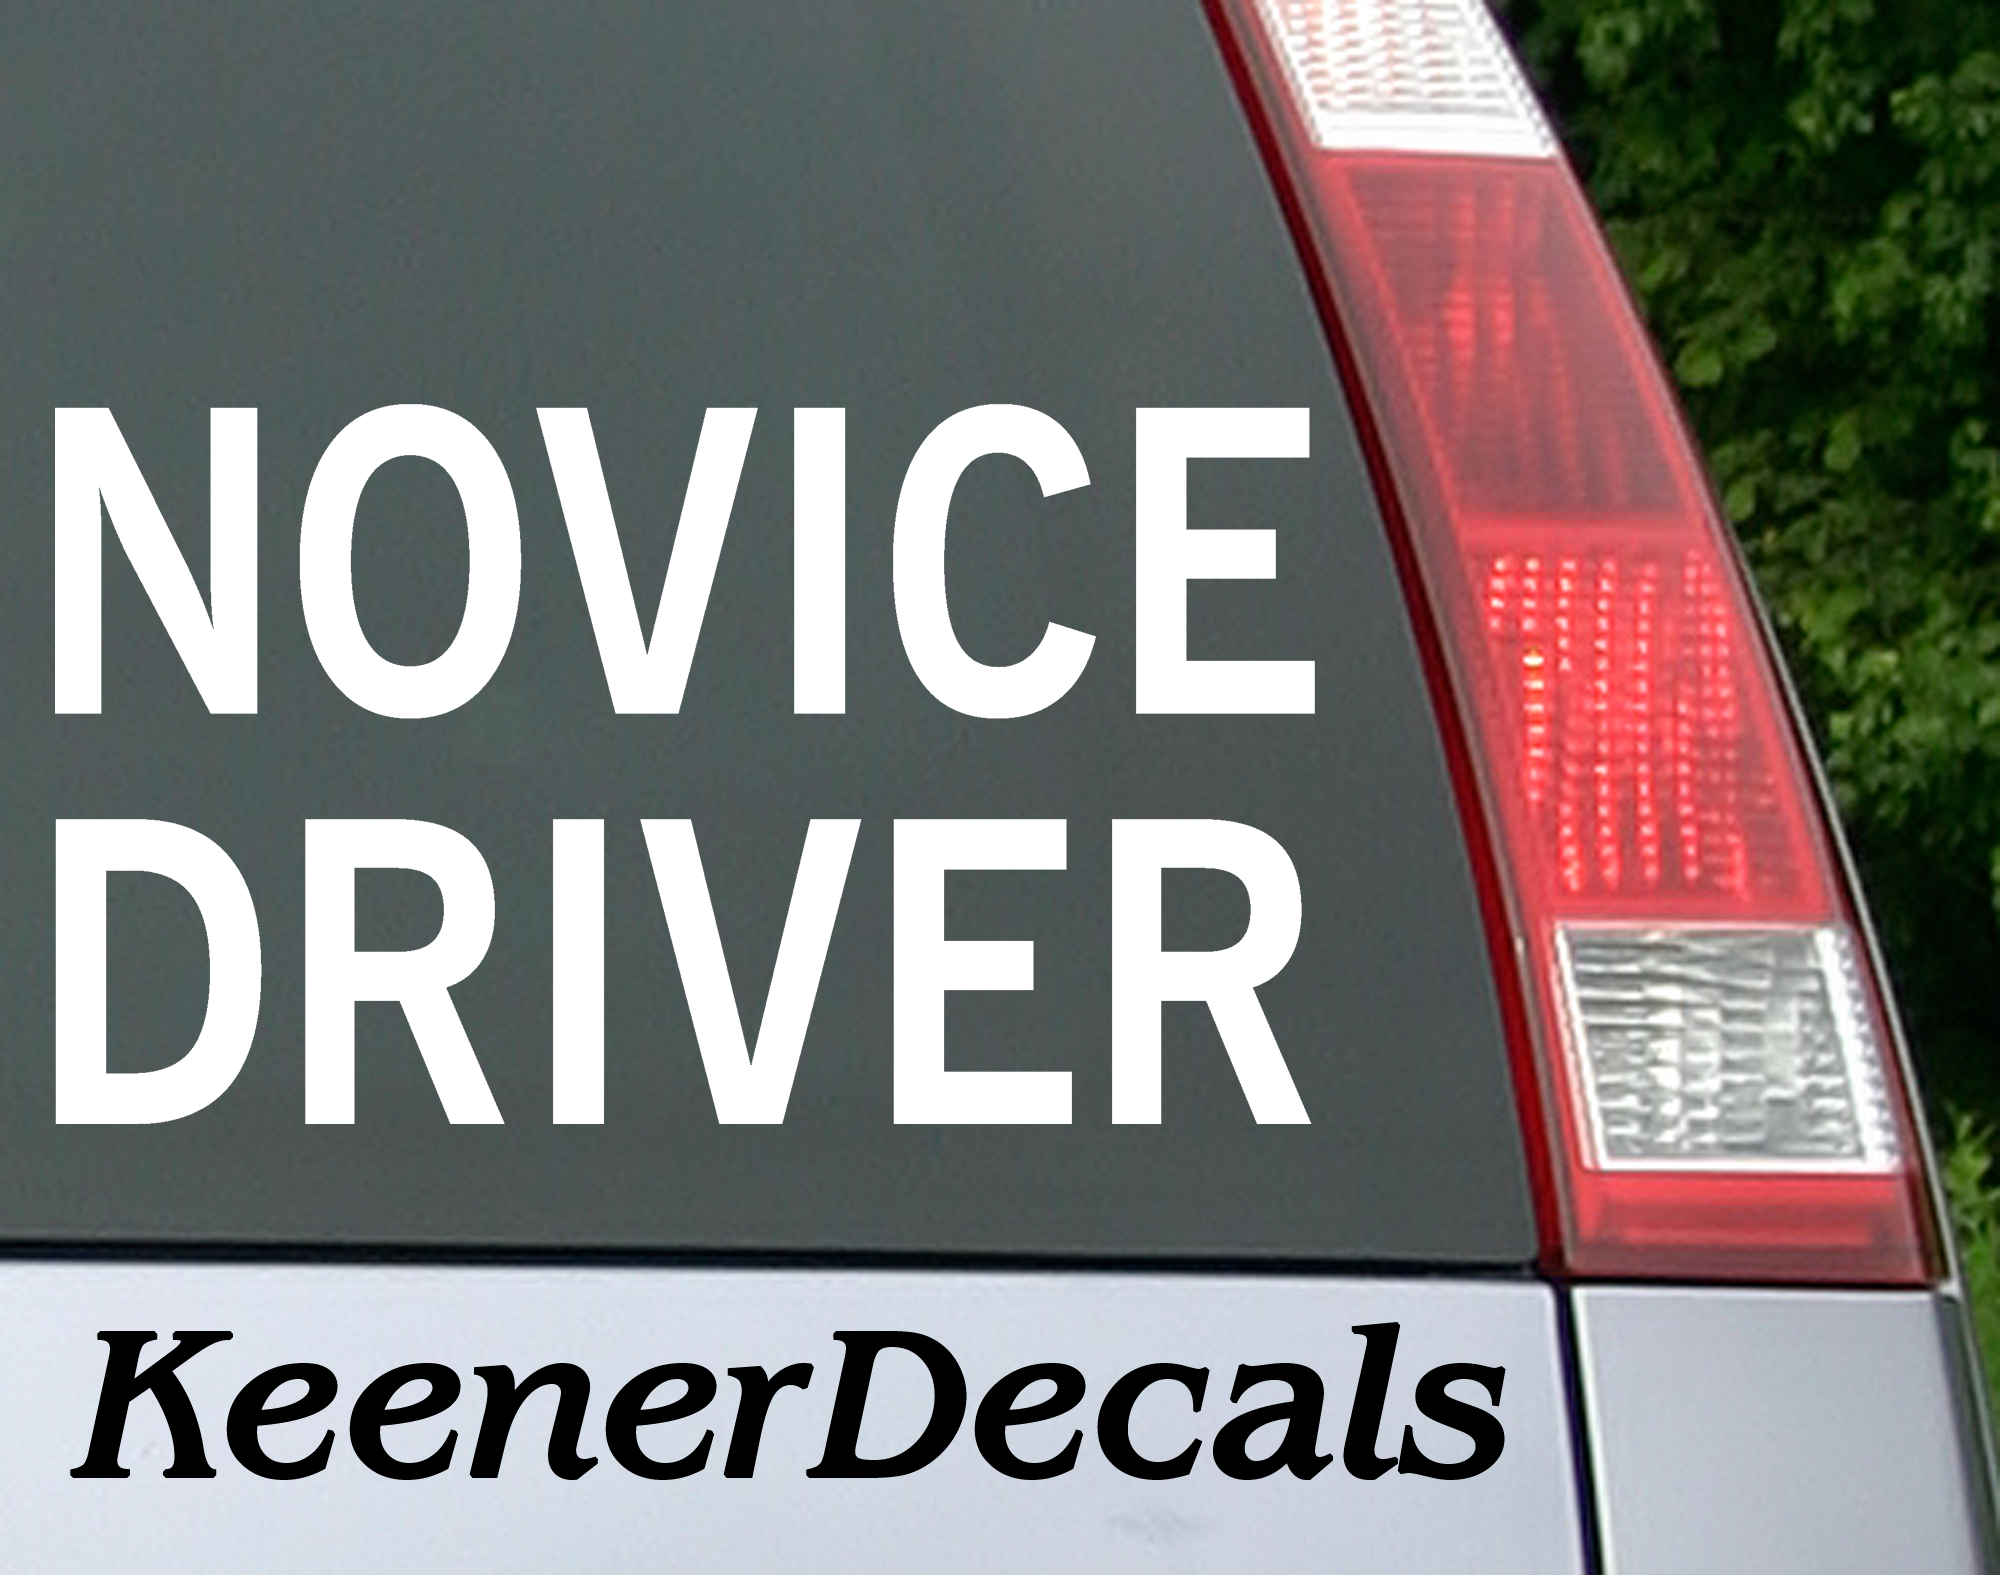 This Novice Driver car decal will inform your fellow drivers that there is a student driver behind the wheel. This should allow a little more patience and allow a little more distance between vehicles.  7"W x 4"H Vinyl Car Decal, Car Sticker, Car Vinyl, Bumper Sticker, Vinyl Stickers, Vinyl Sticker.